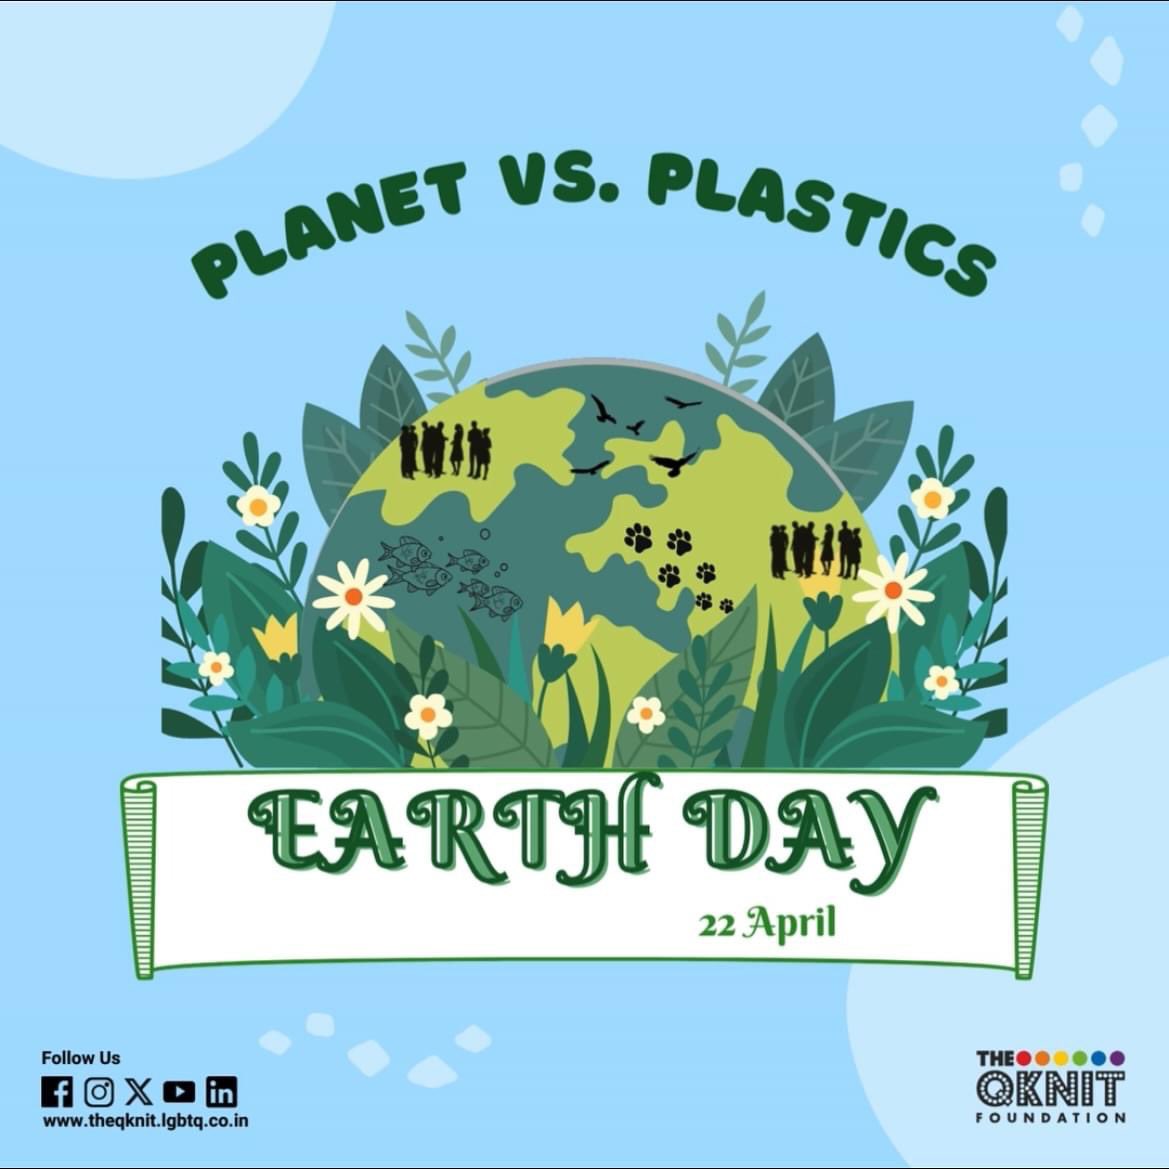 22nd April is celebrated as Earth Day to promote and support the efforts towards the protection of the environment. This year the theme for #EarthDay is #PlanetVsPlastics. It is very important that all of us understand the importance of conservation for larger sustainability.